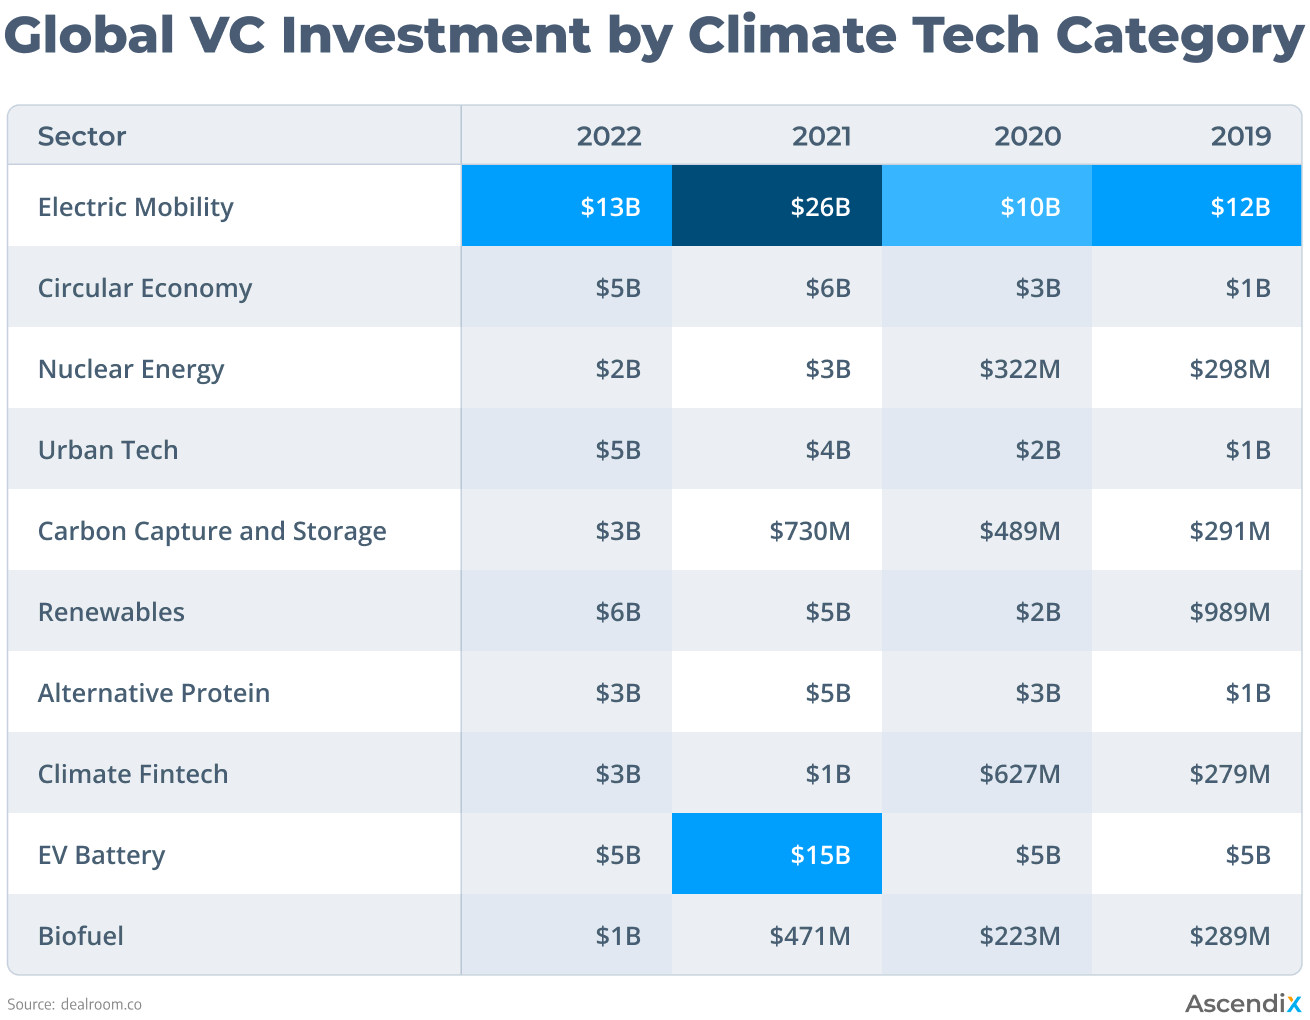 Global VC investment by climate tech category